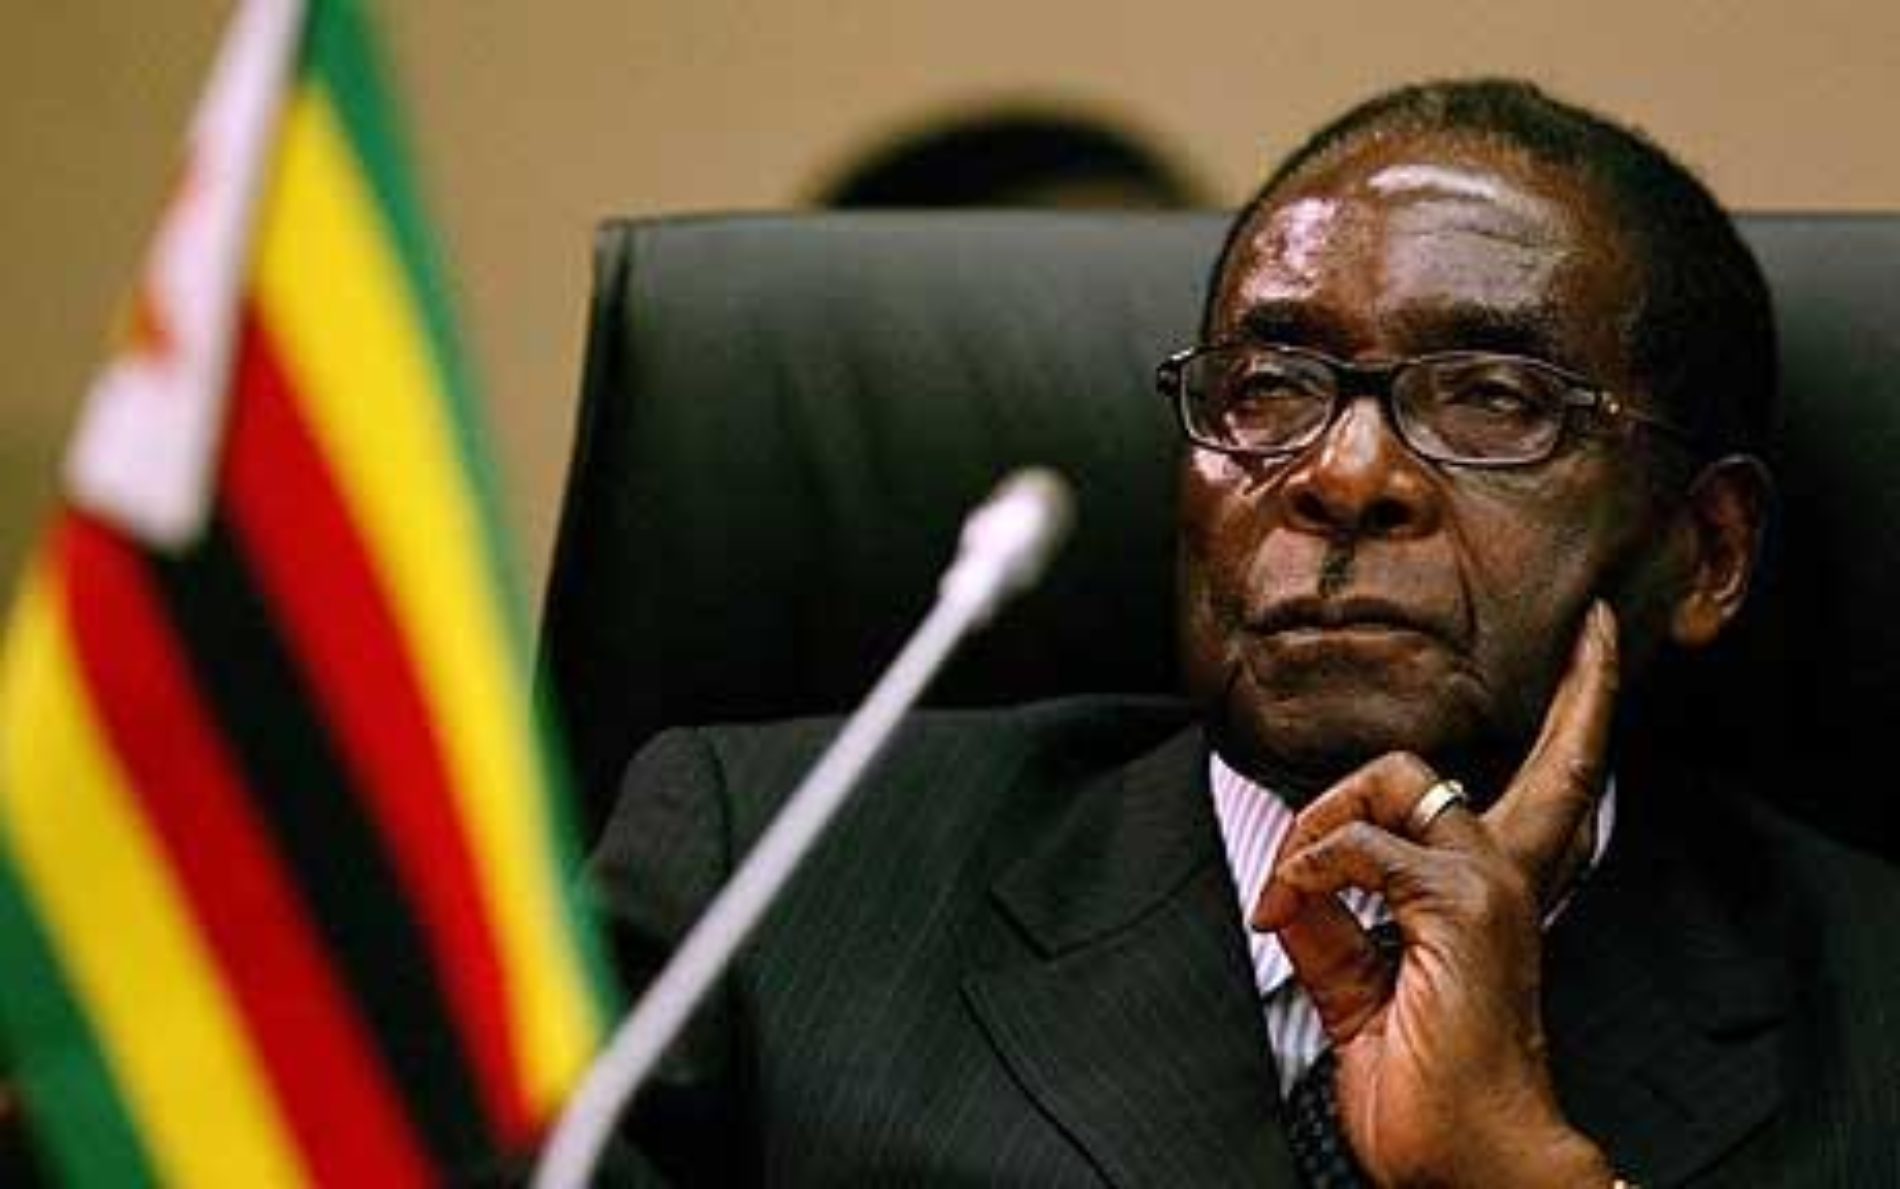 President Mugabe Reportedly In Critical Condition After Heart Attack, Government Refuses To Respond